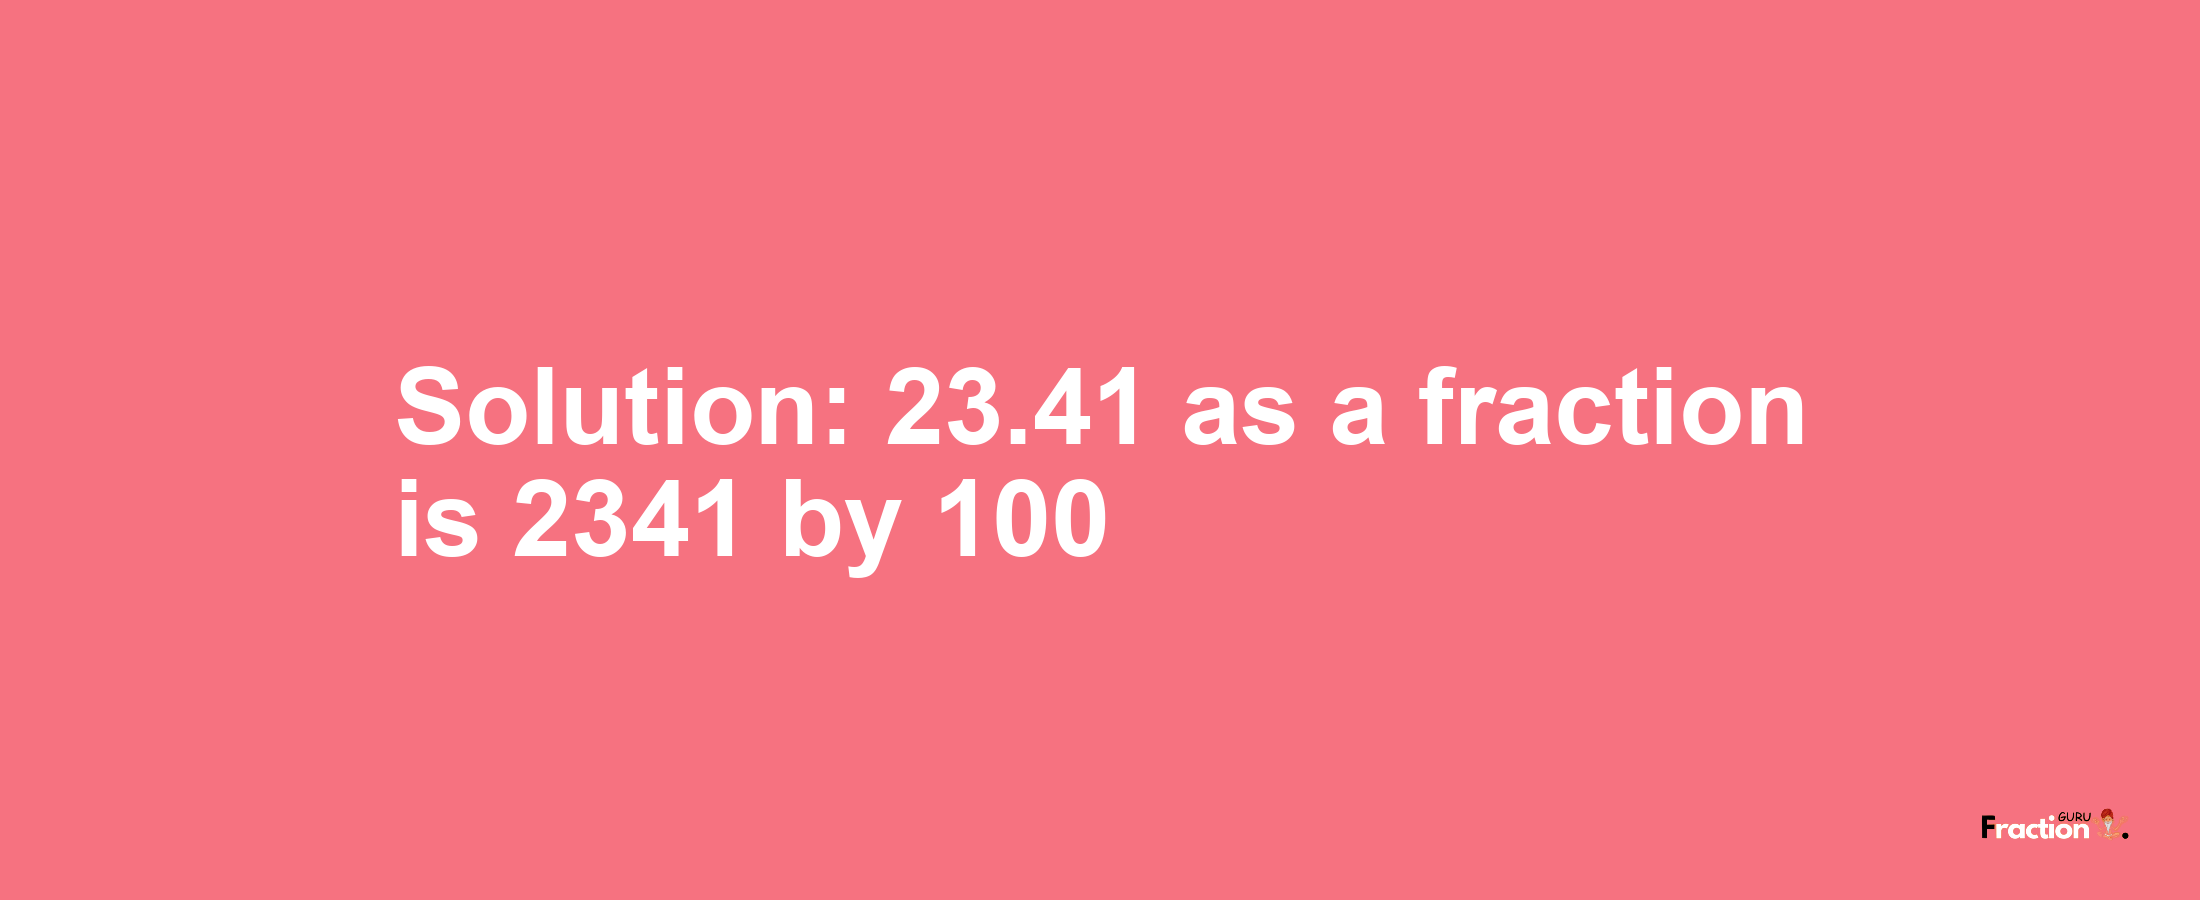 Solution:23.41 as a fraction is 2341/100